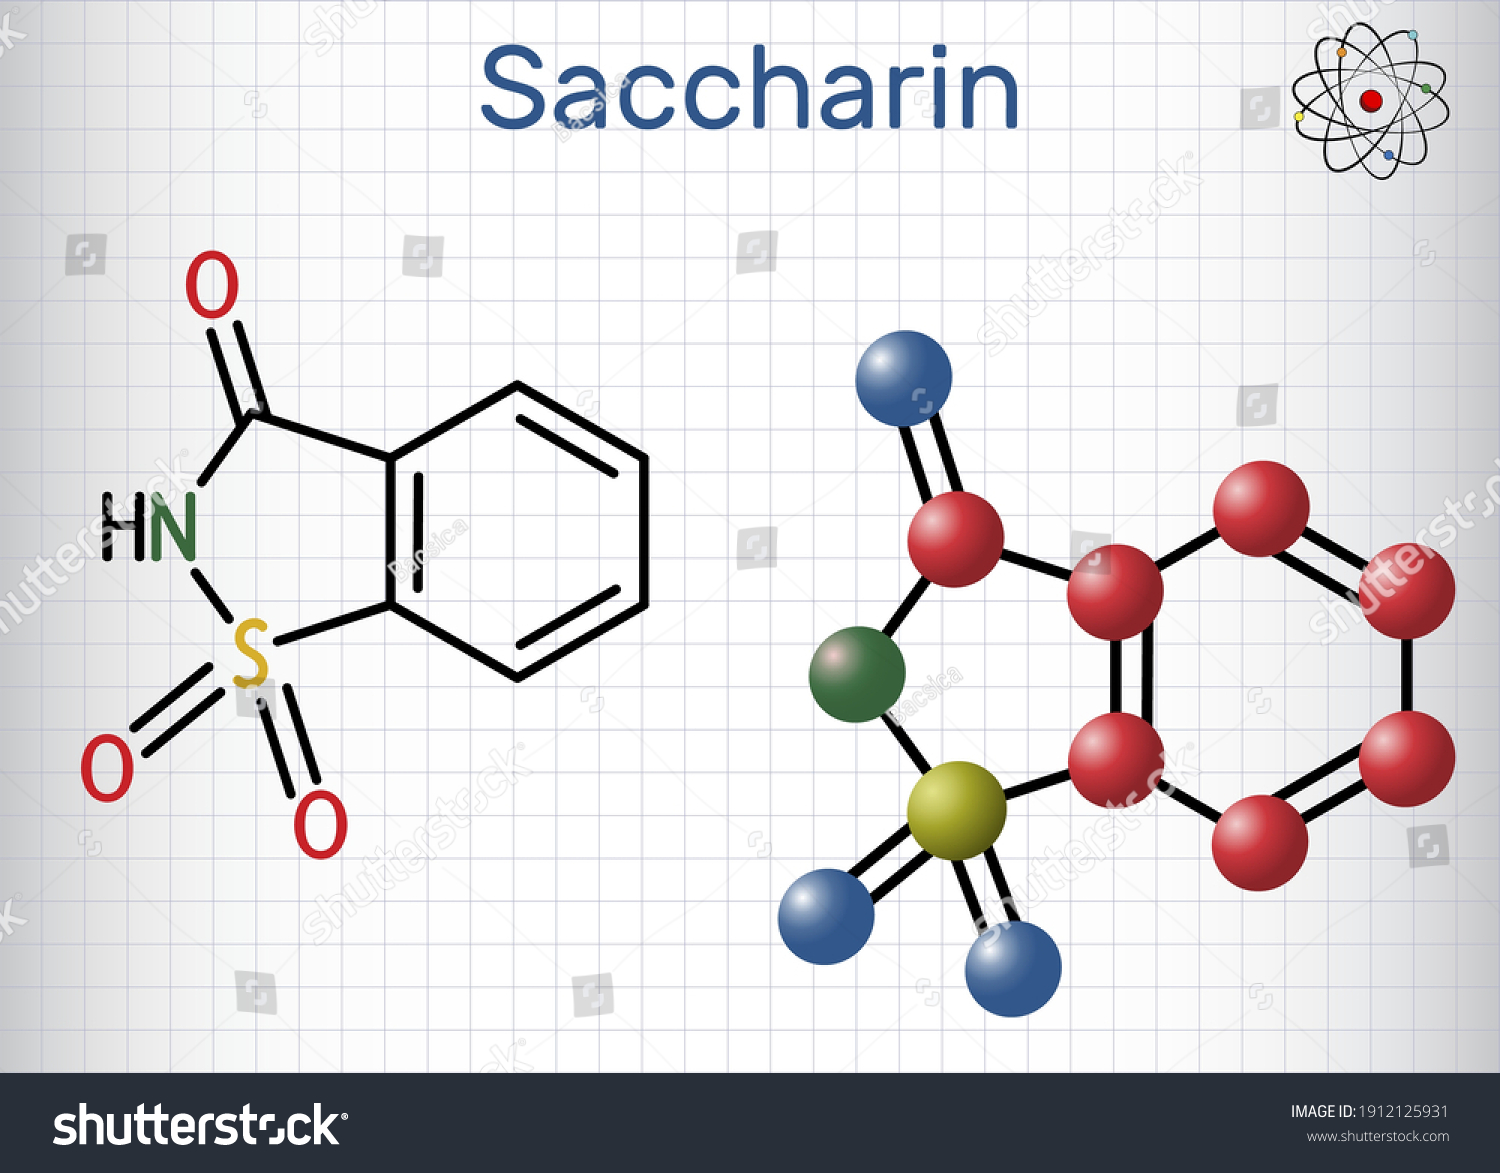 SVG of Saccharin molecule. It is artificial sweetener, sweetening agent, xenobiotic and environmental contaminant. Structural chemical formula, molecule model. Sheet of paper in a cage. Vector illustration svg